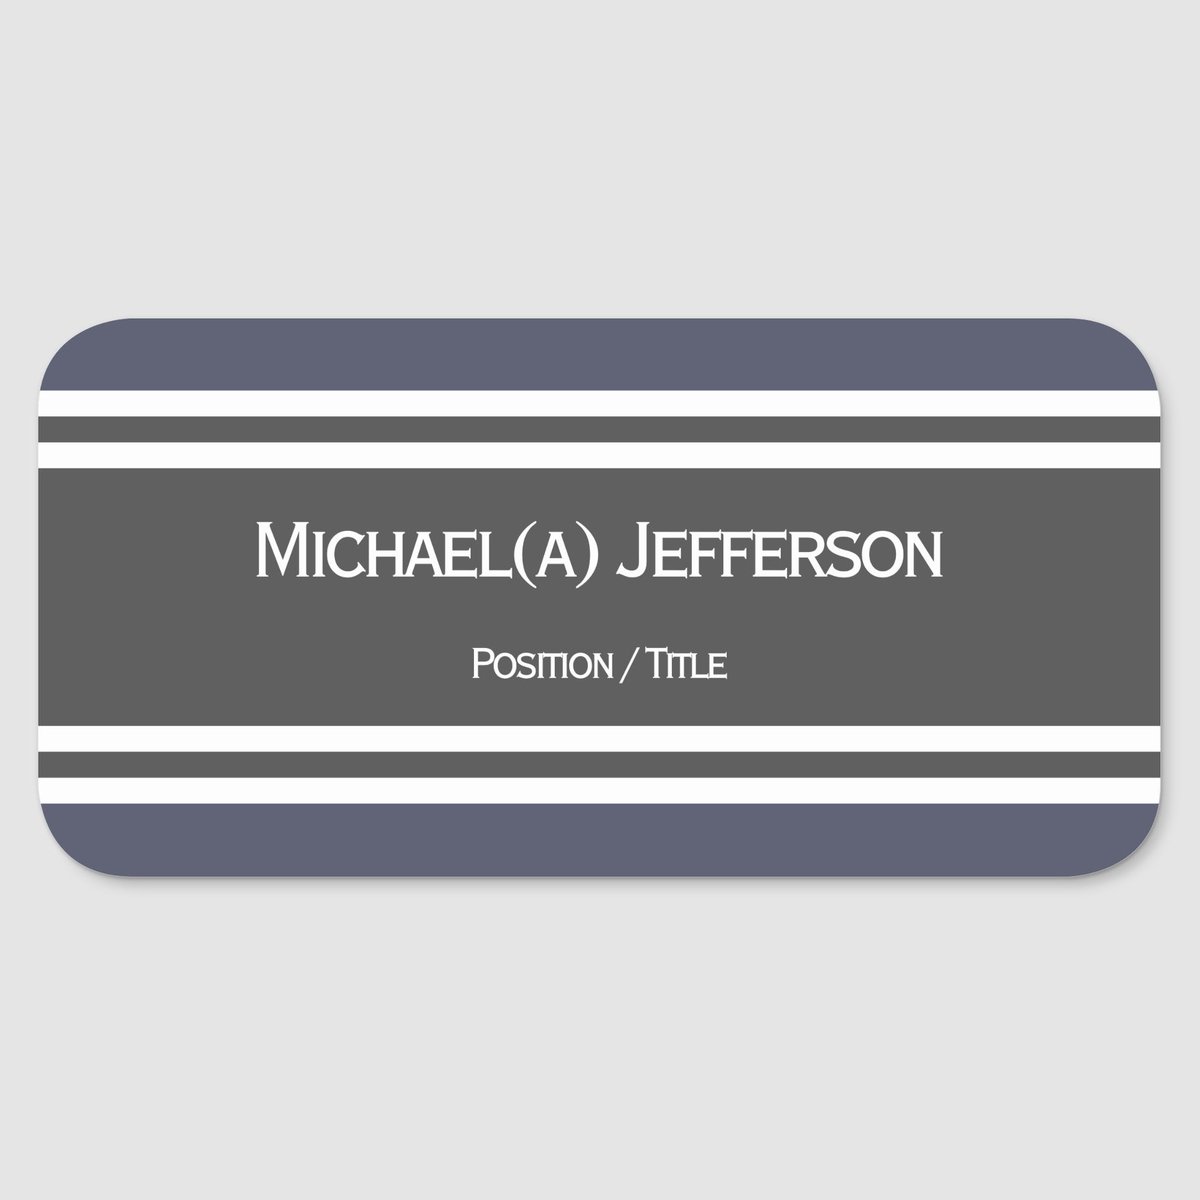 Grey Blue Name Tag zazzle.com/moden_dark_gre… Elevate your look with this dark grey and delft blue #nametag or as a #Personalizedgift for #corporate #employees #Professional #identity for every team #nametags Give a #corporategift #zazzlemade #zazzle #BusinessMan #BusinessSolutions